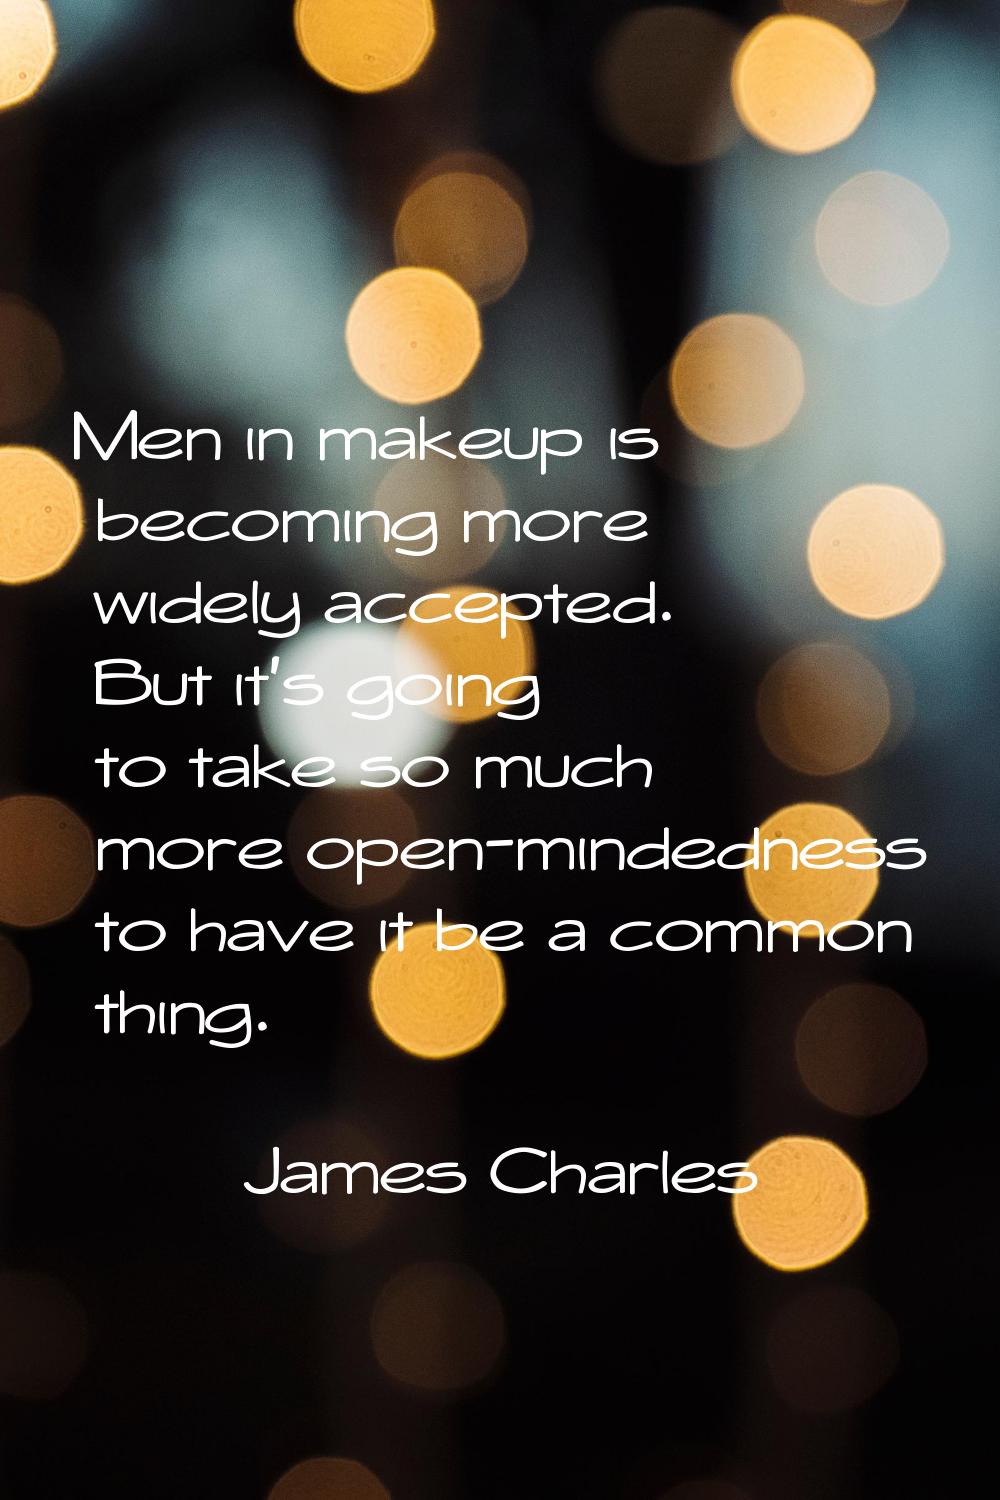 Men in makeup is becoming more widely accepted. But it's going to take so much more open-mindedness